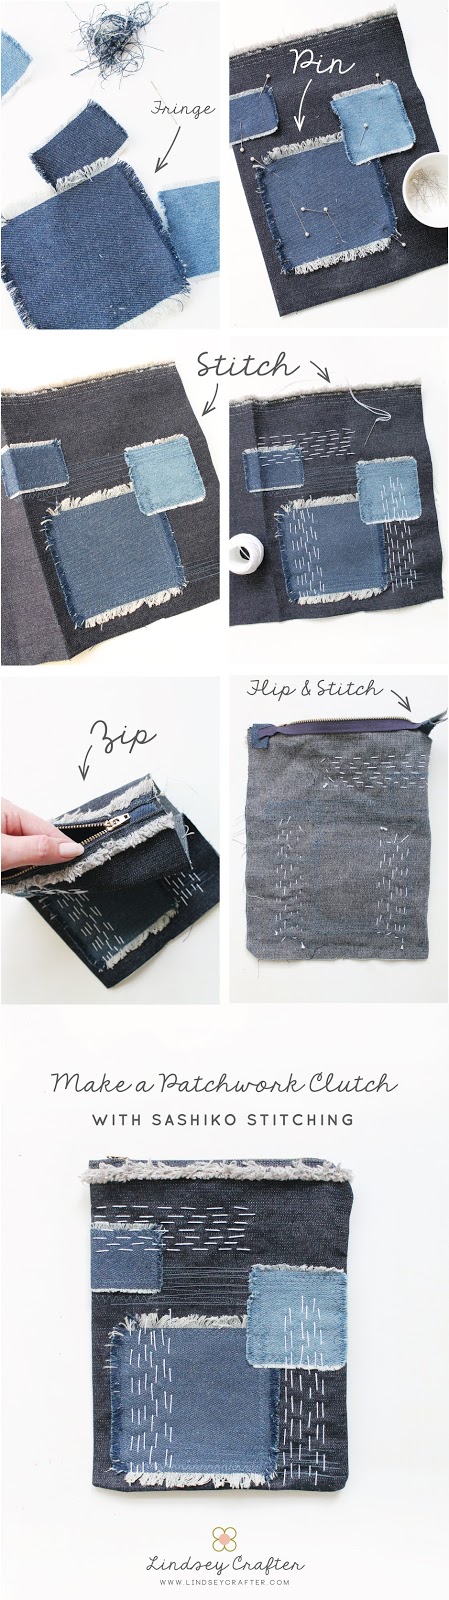 Make a patchwork clutch with denim and fabric scraps